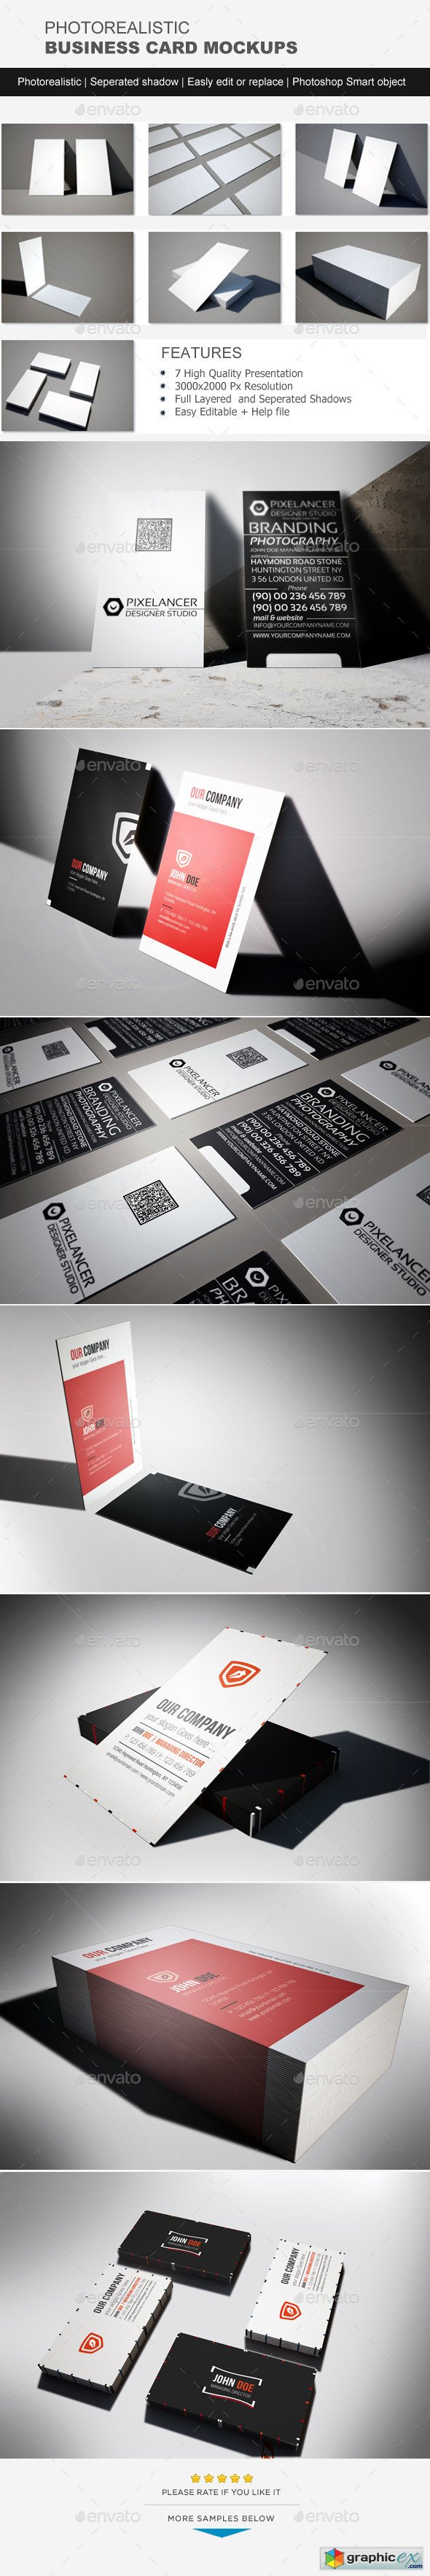 Photorealistic Business Card Mock-Up 11445256